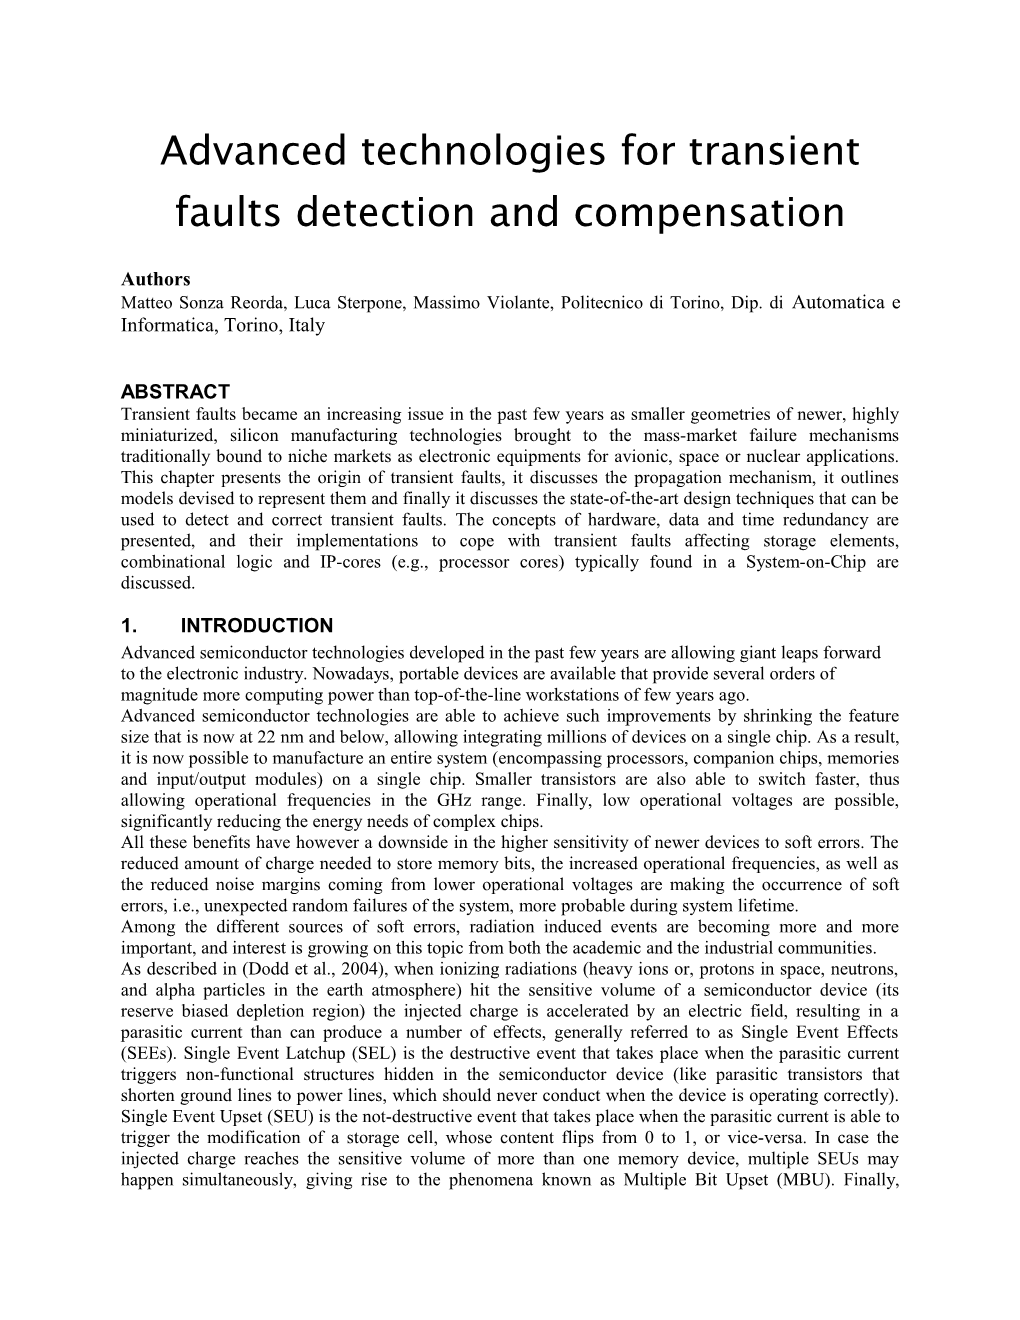 Advanced Technologies for Transient Faults Detection and Compensation